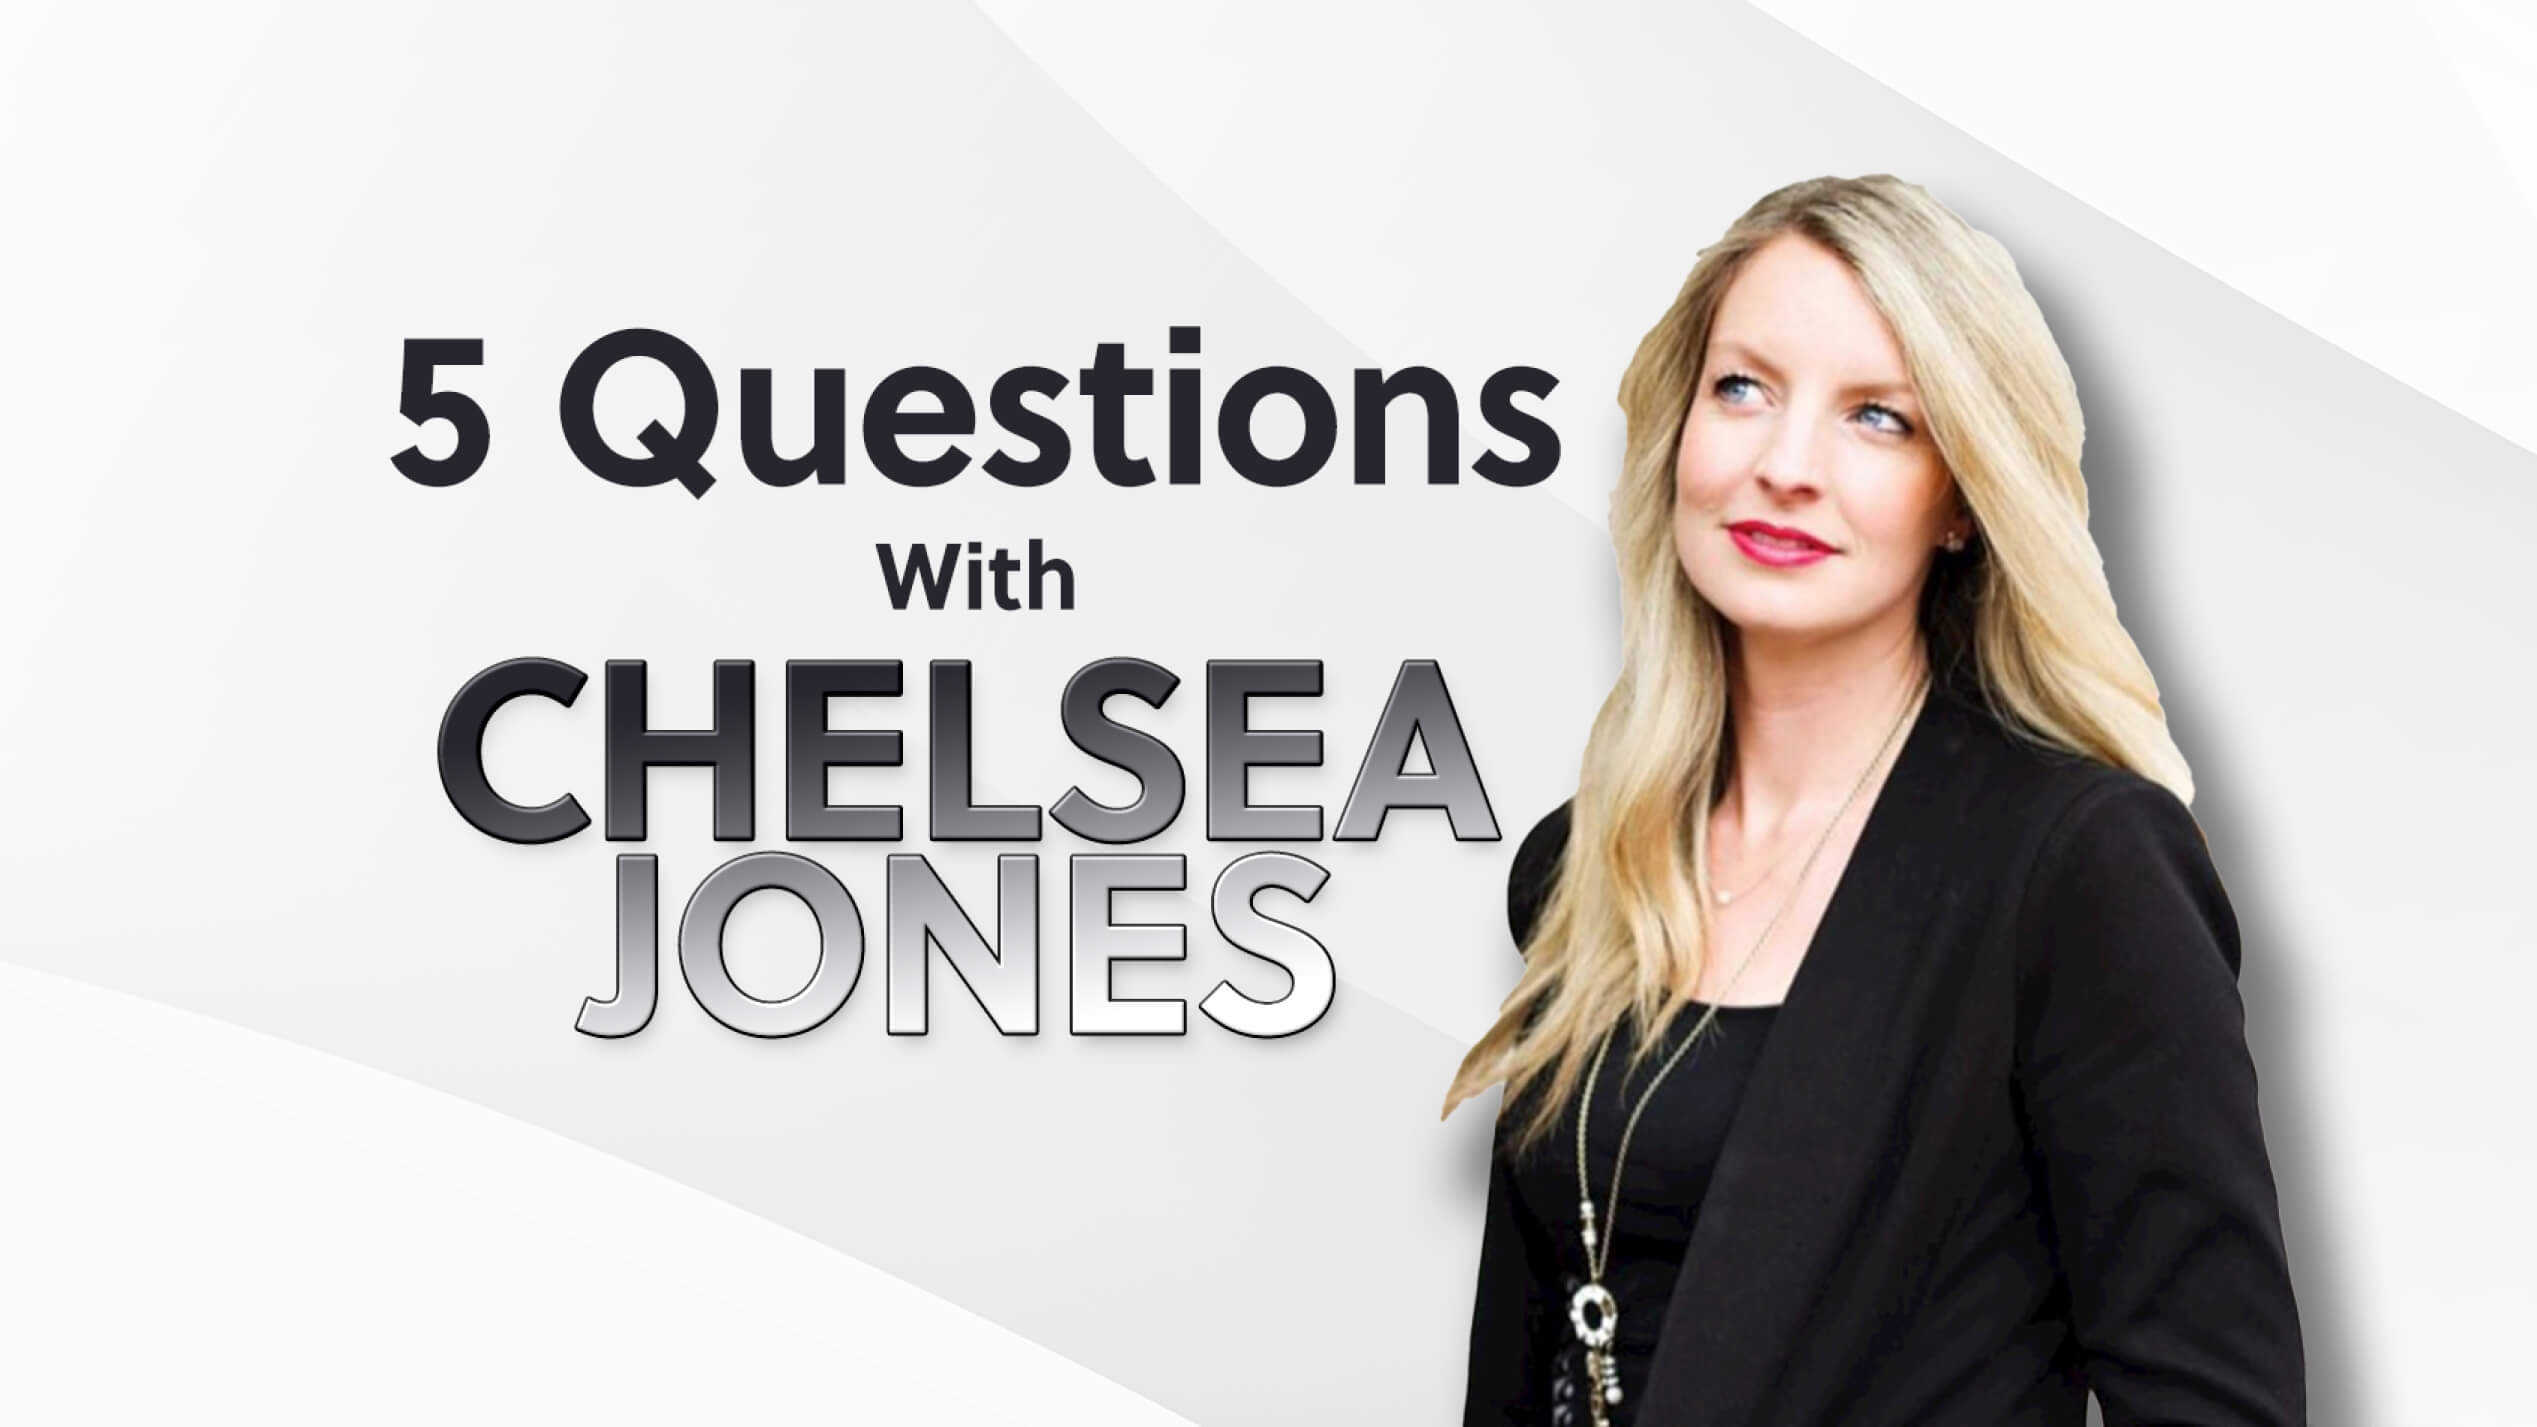 5 Questions With Chelsea Jones from Chelsea & Rachel Co.: Simplify to Drive More Traffic